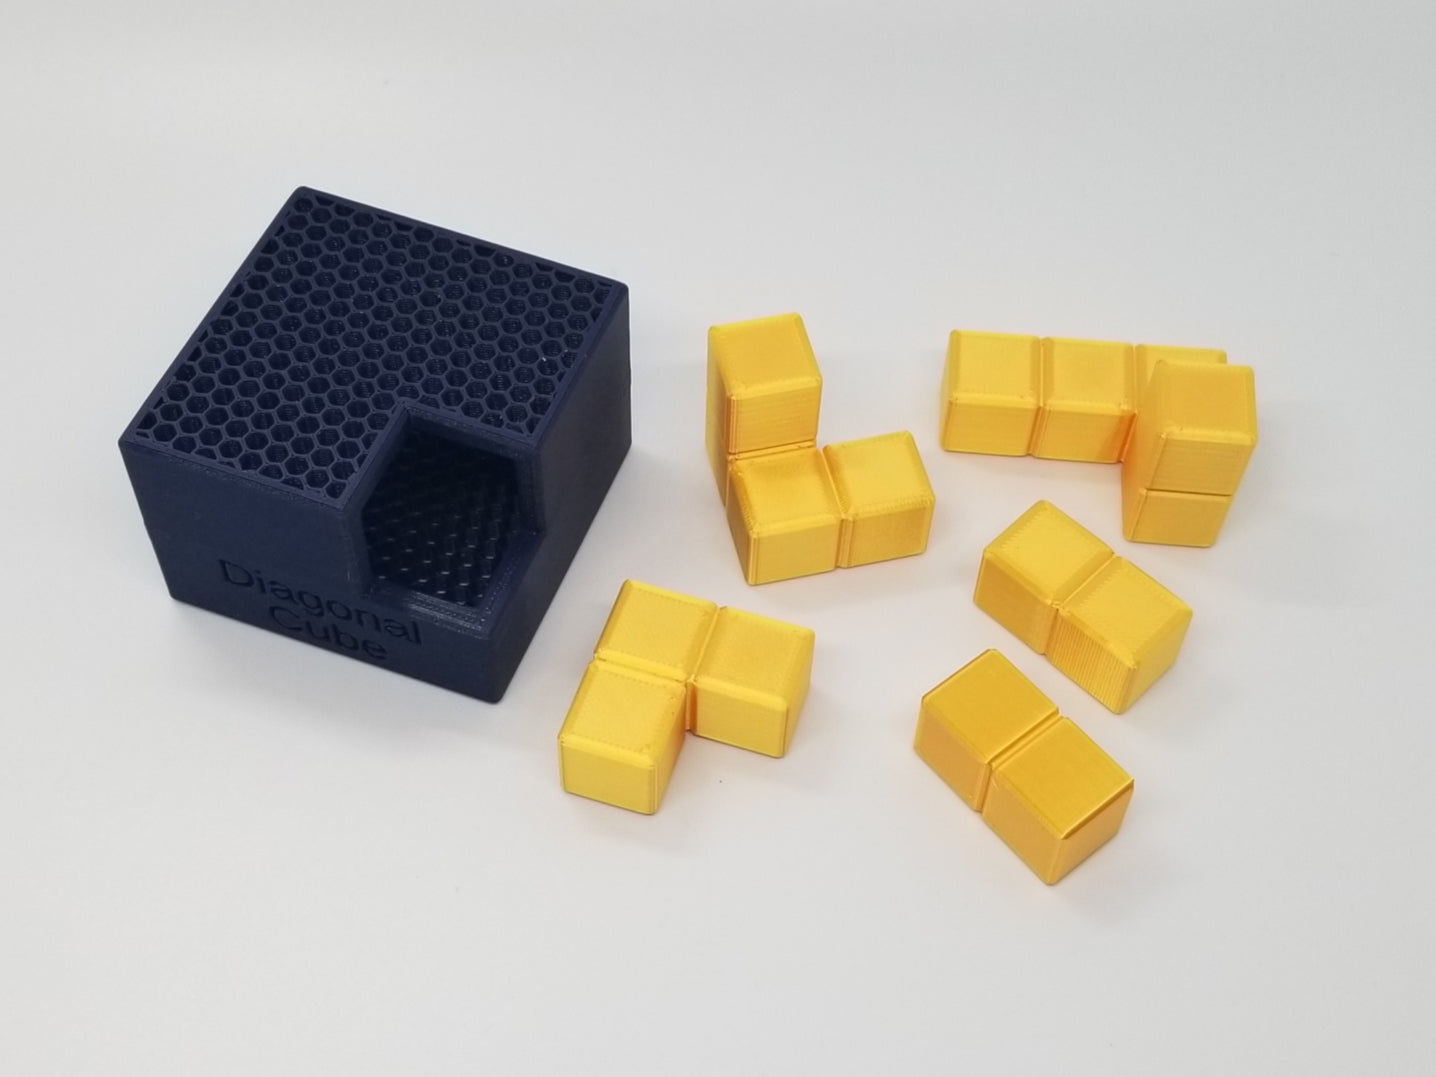 ARCparent Cube Puzzles - 3D Printed - Rotational 3D Printed Packing Puzzles